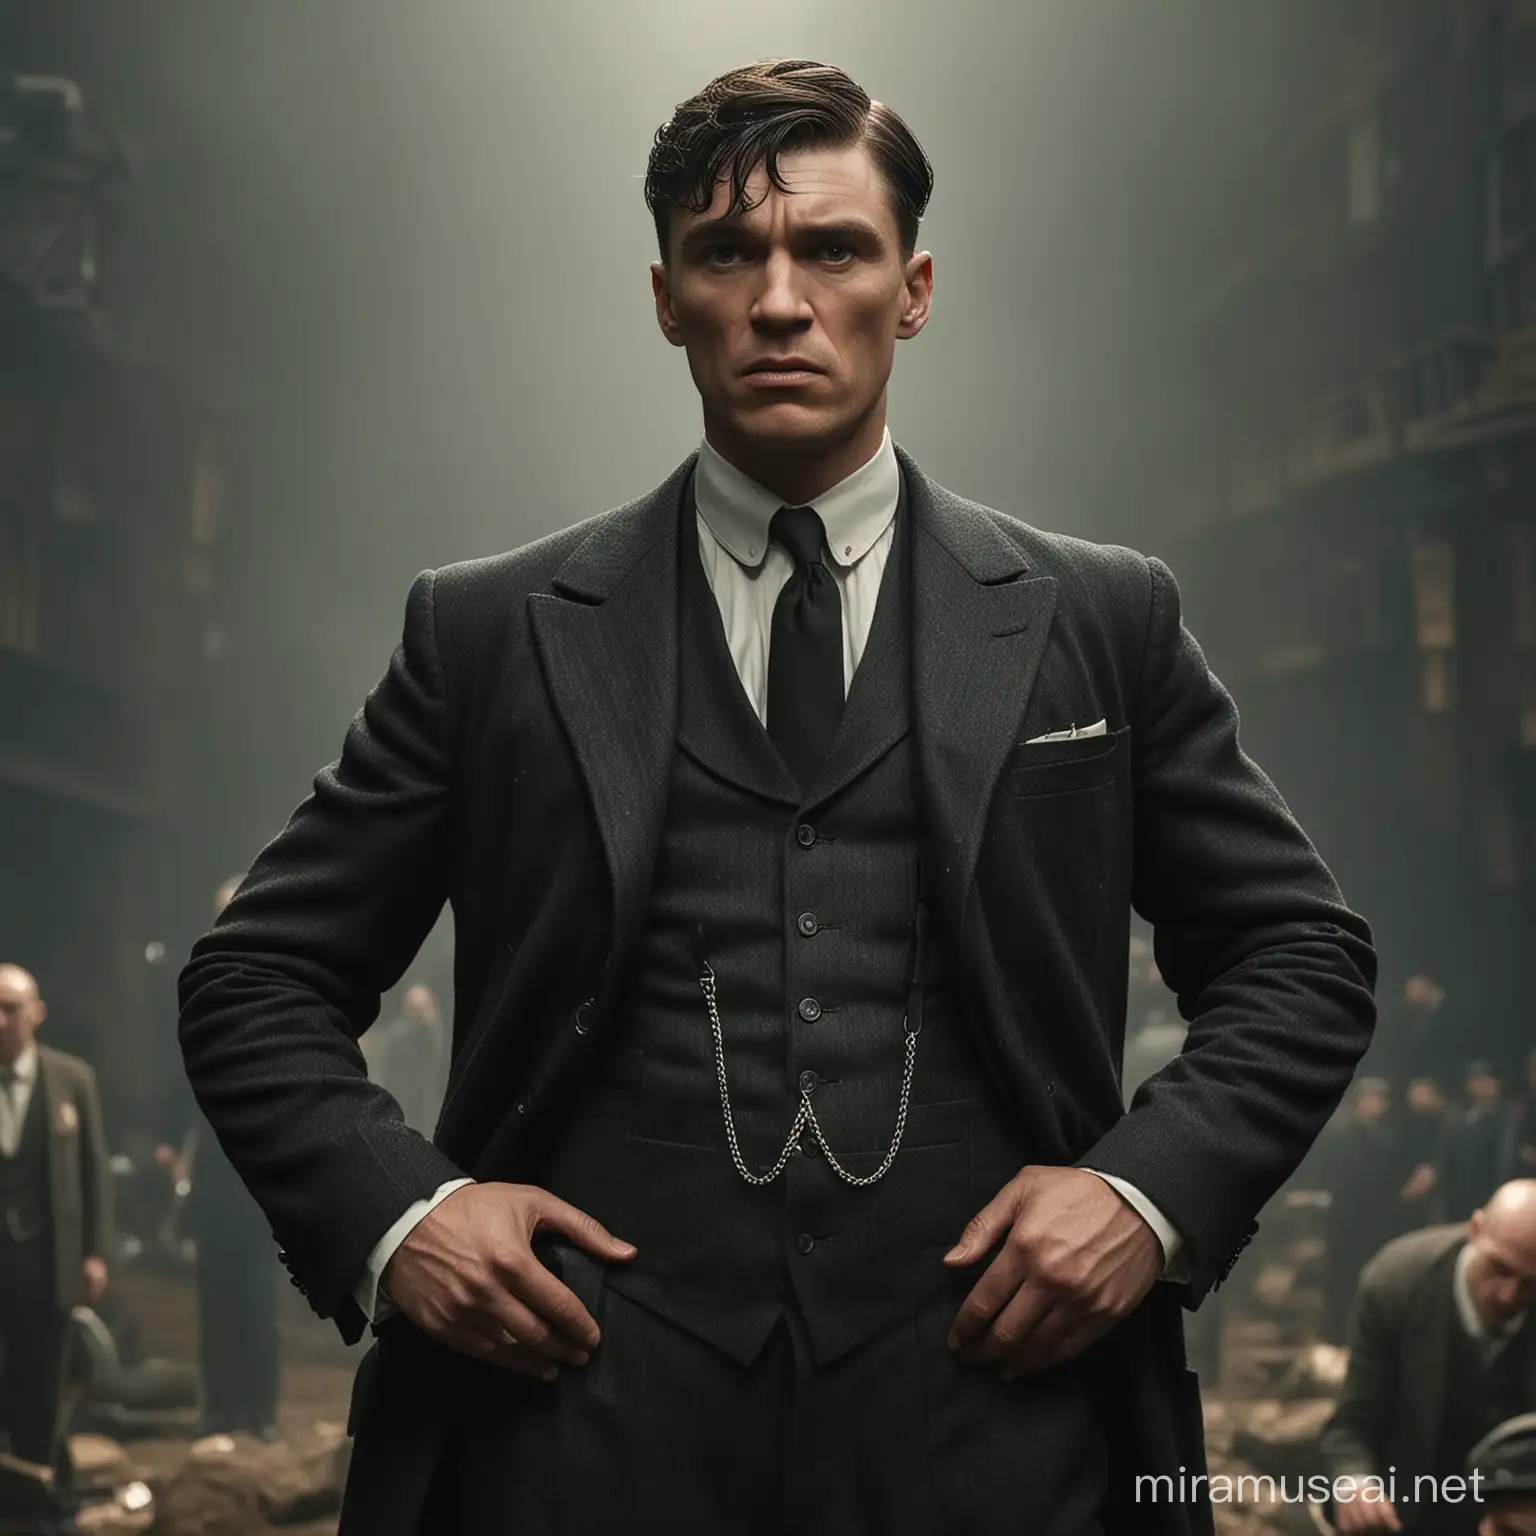 Thomas Shelby Actor in Authoritative Stance with Defiant Expression